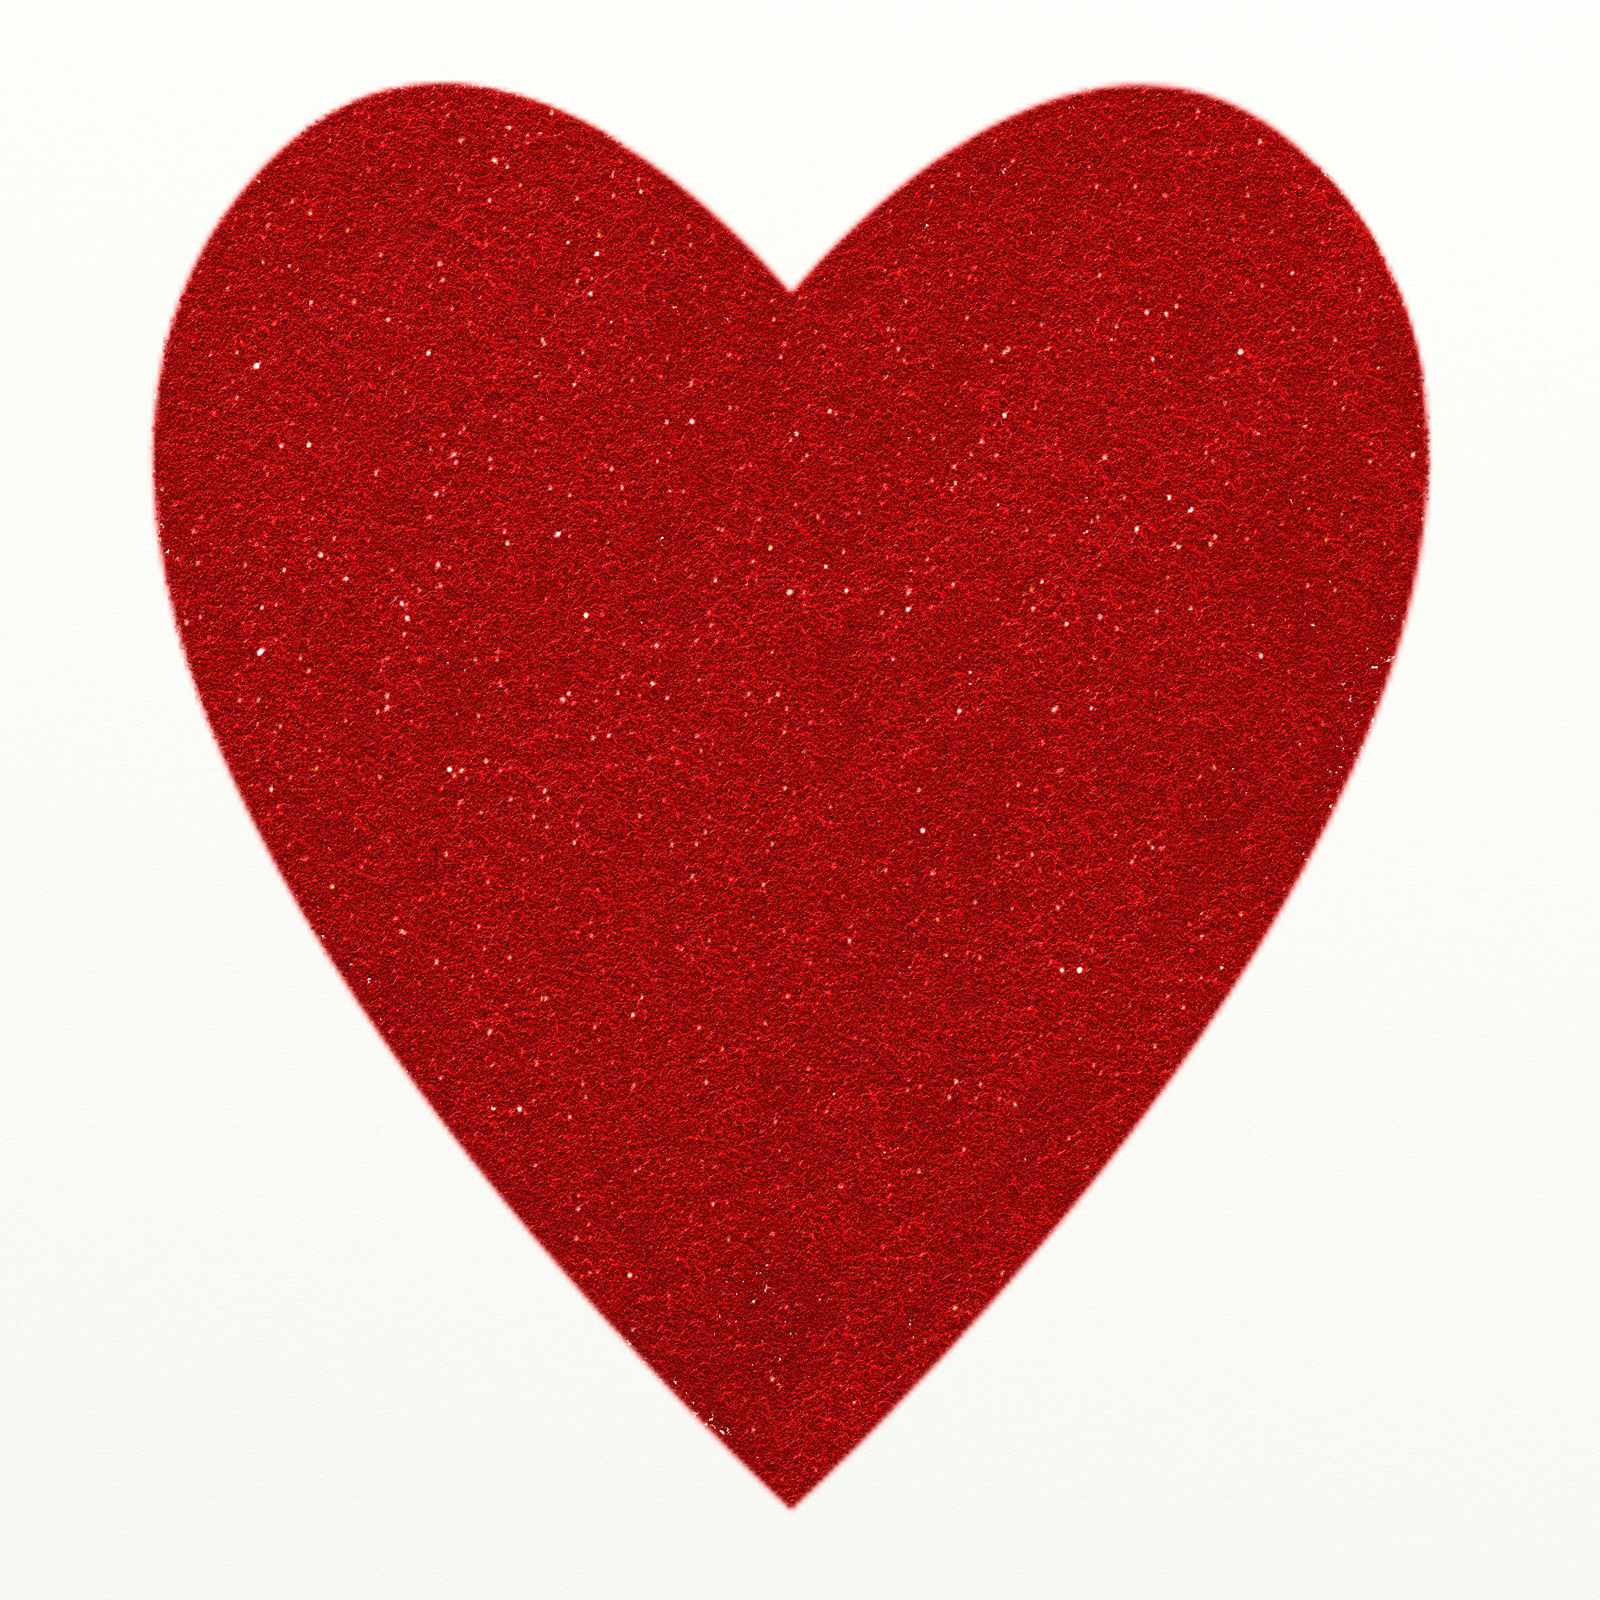 red heart clipart high resolution